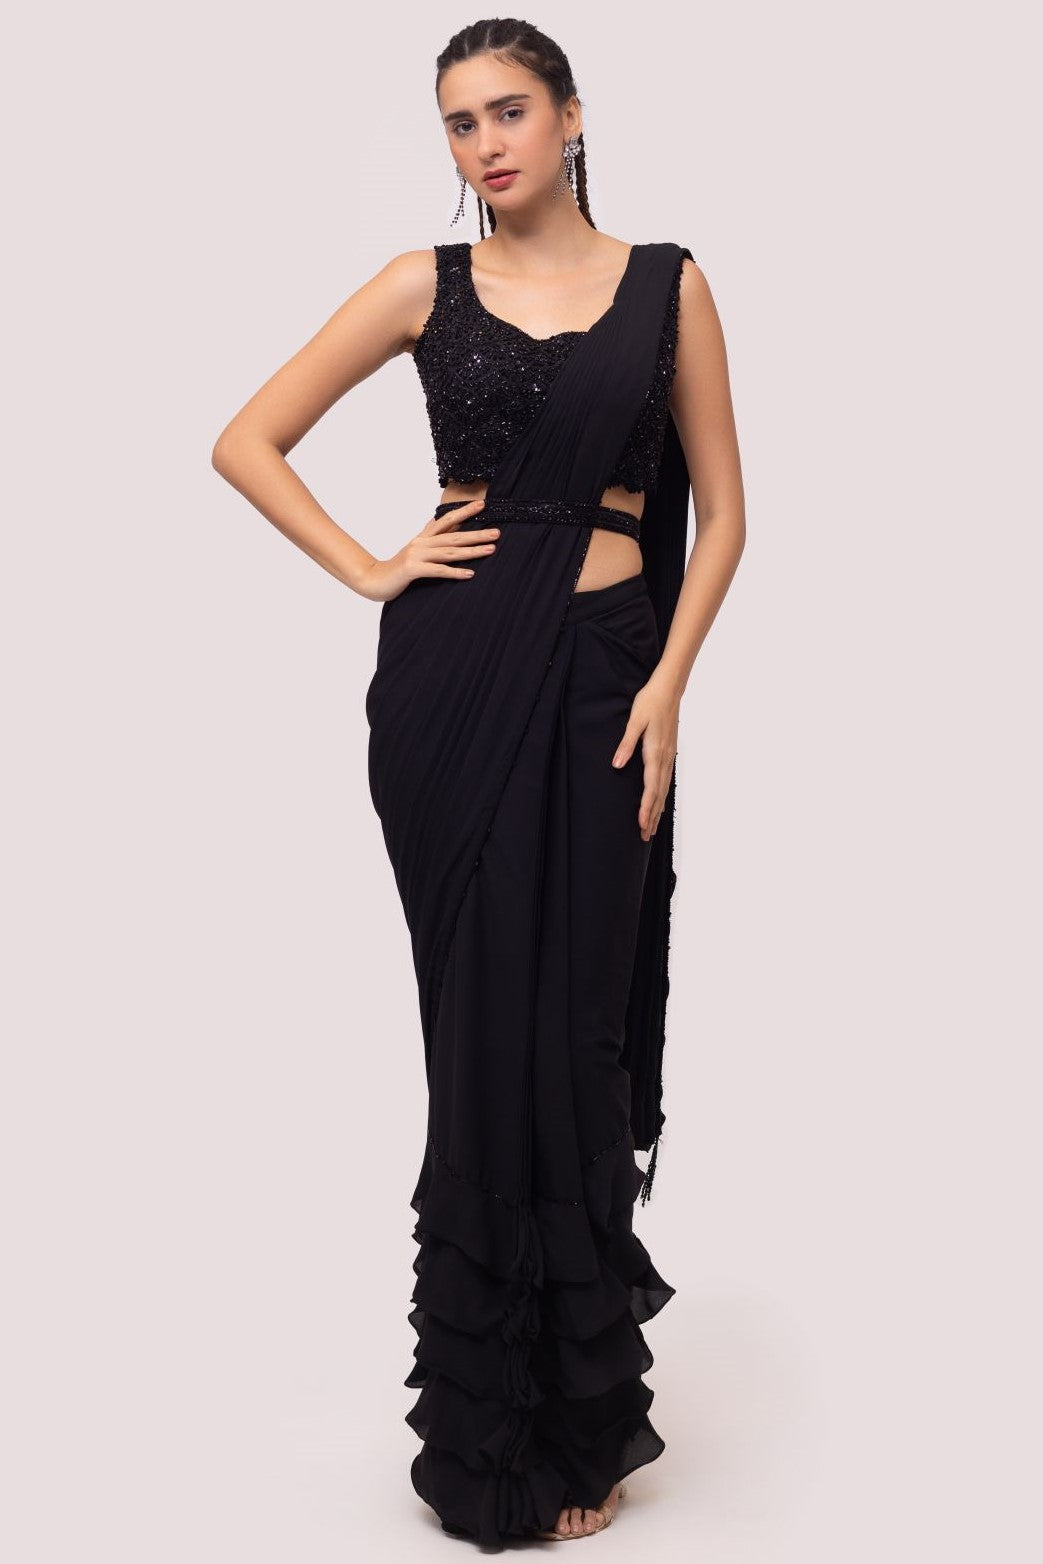 Shop black pre-draped georgette saree online in USA with soft ruffles. Look your best at parties and weddings in beautiful designer sarees, embroidered sarees, handwoven sarees, silk sarees, organza saris from Pure Elegance Indian saree store in USA.-full view